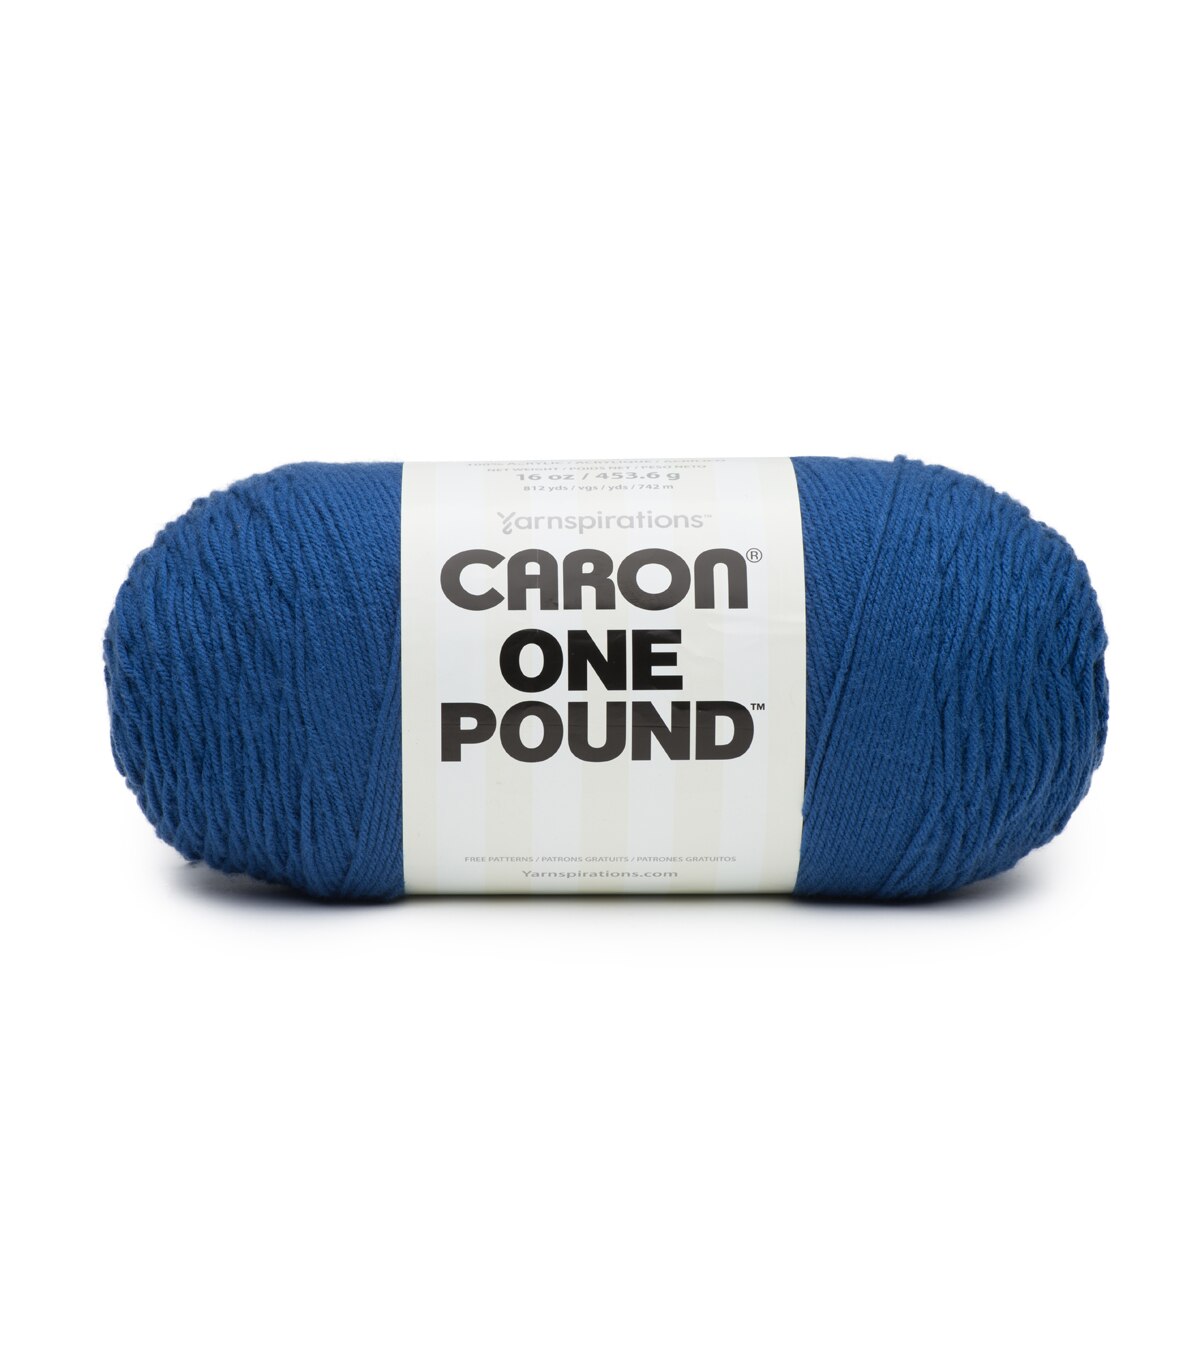 Caron One Pound Yarn Color Chart